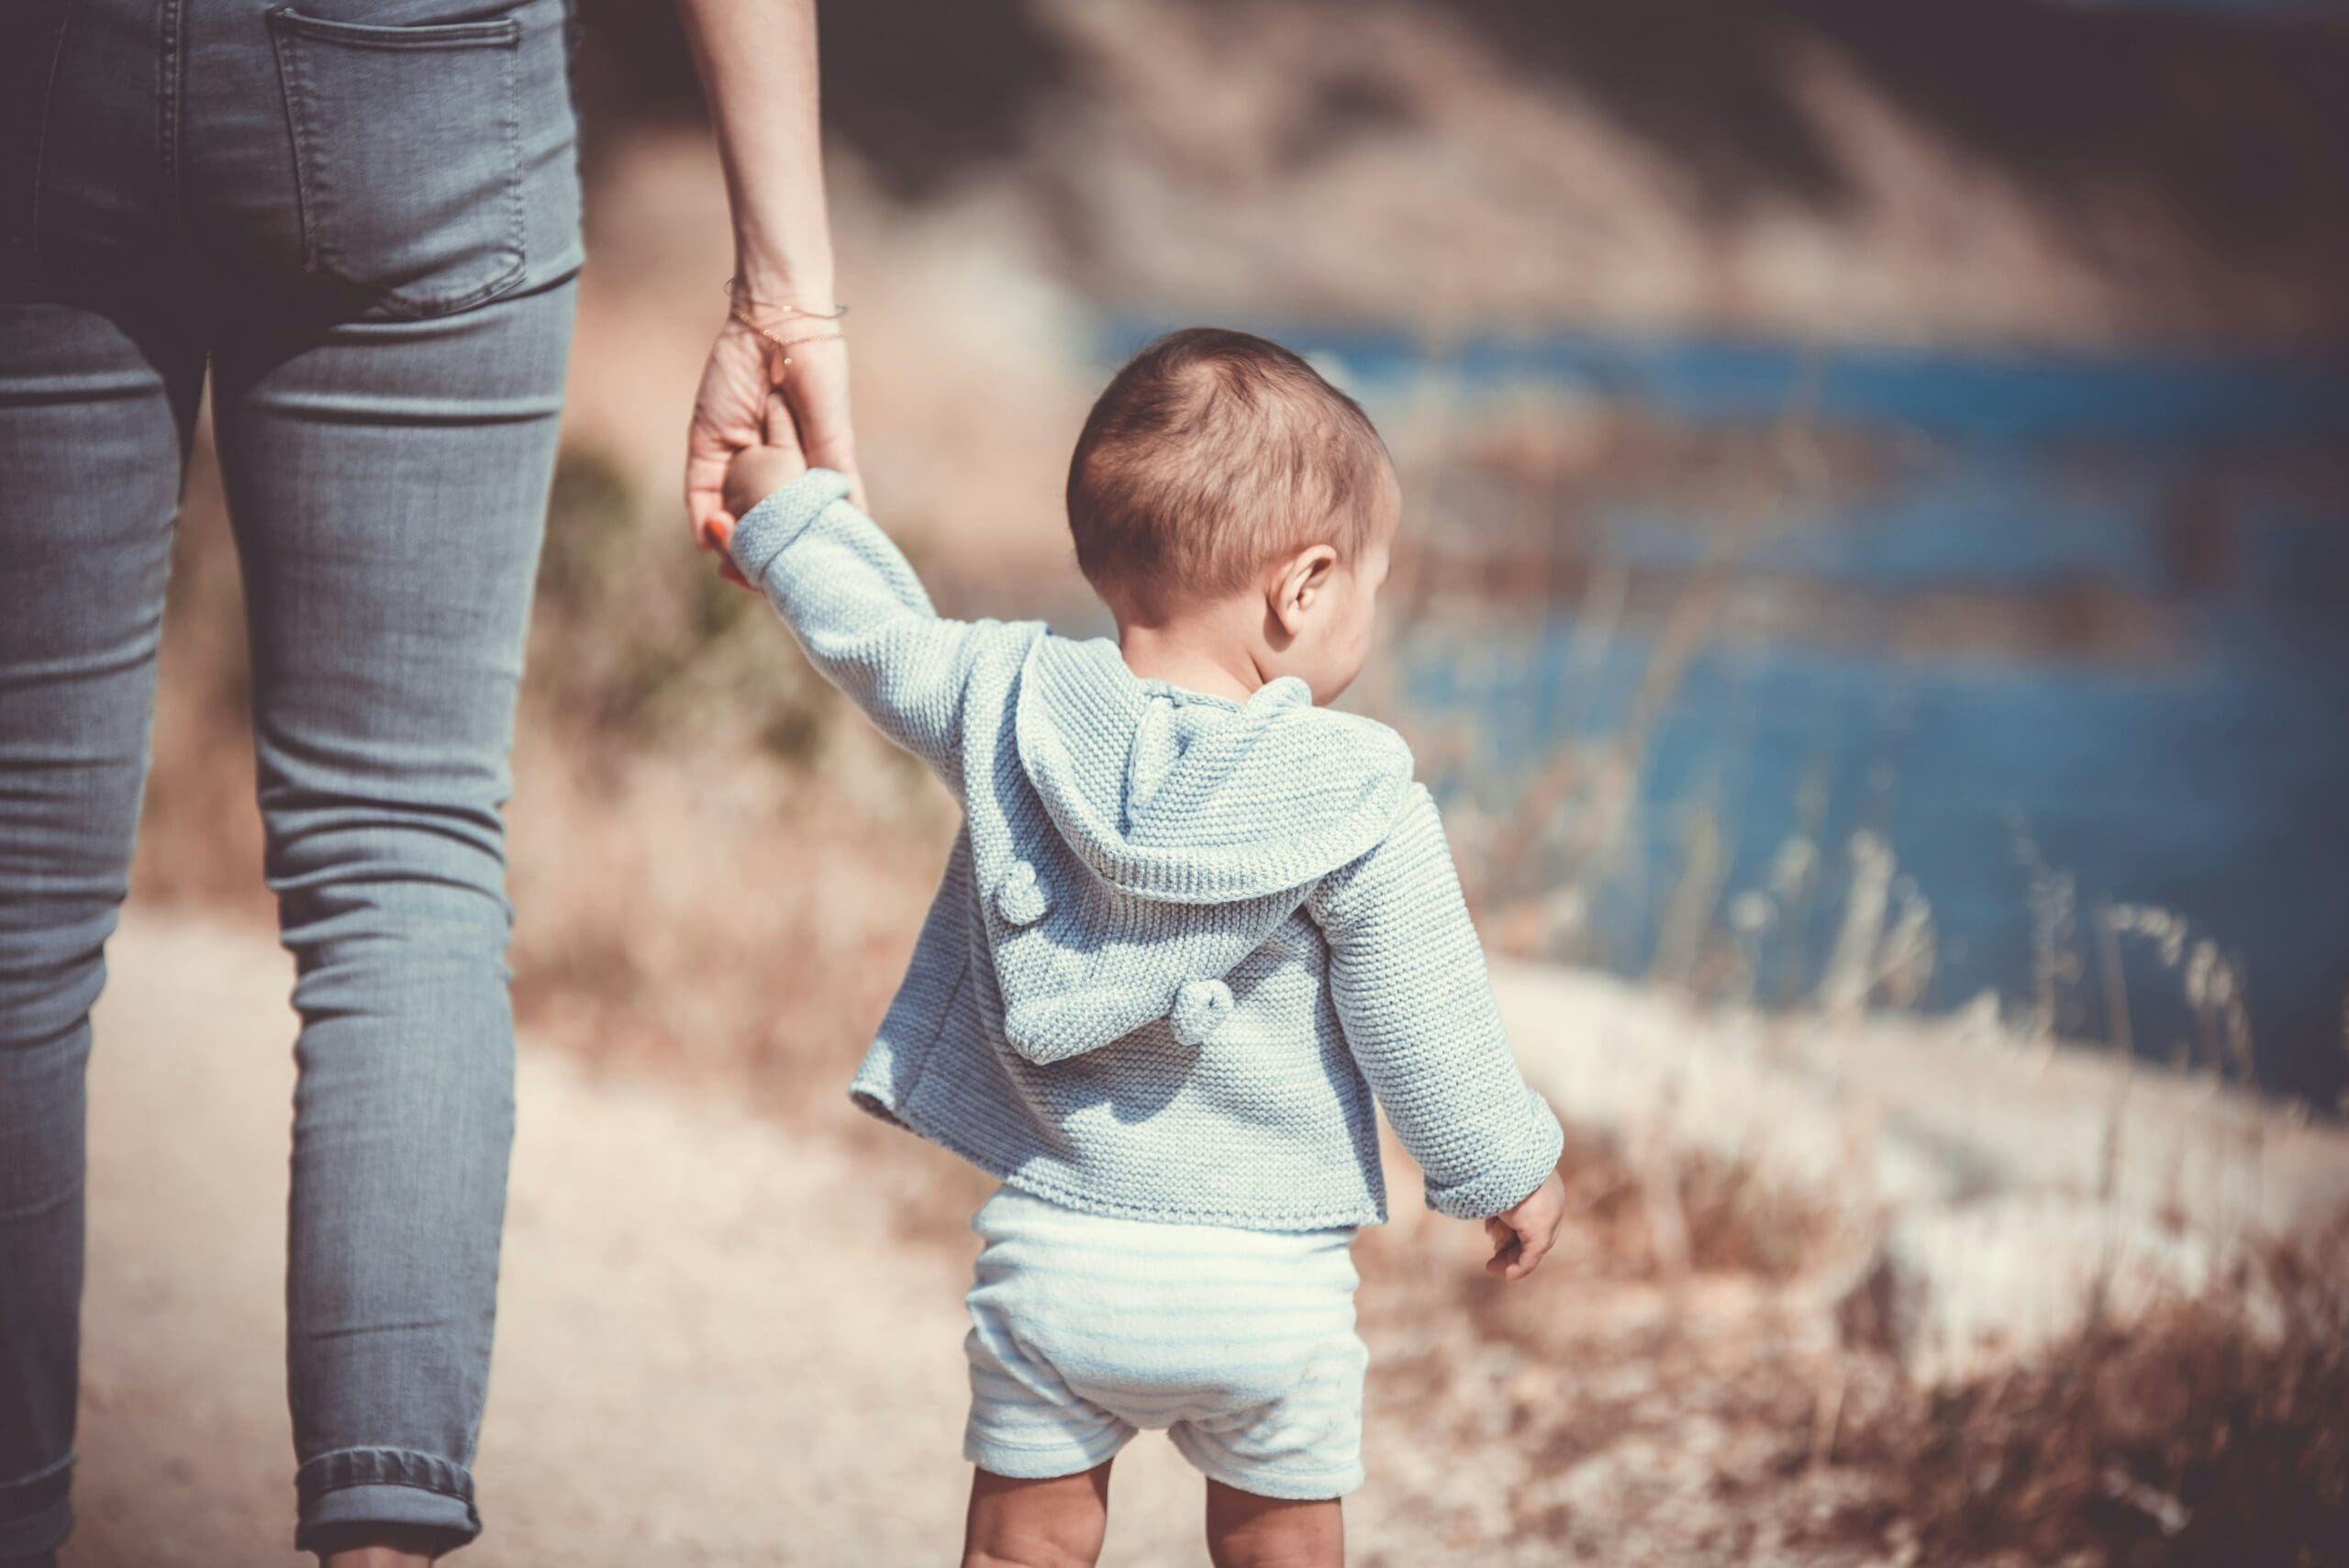 A toddler taking confident steps while holding an adult's hand, capturing the guiding support of the adoption process in Australia.